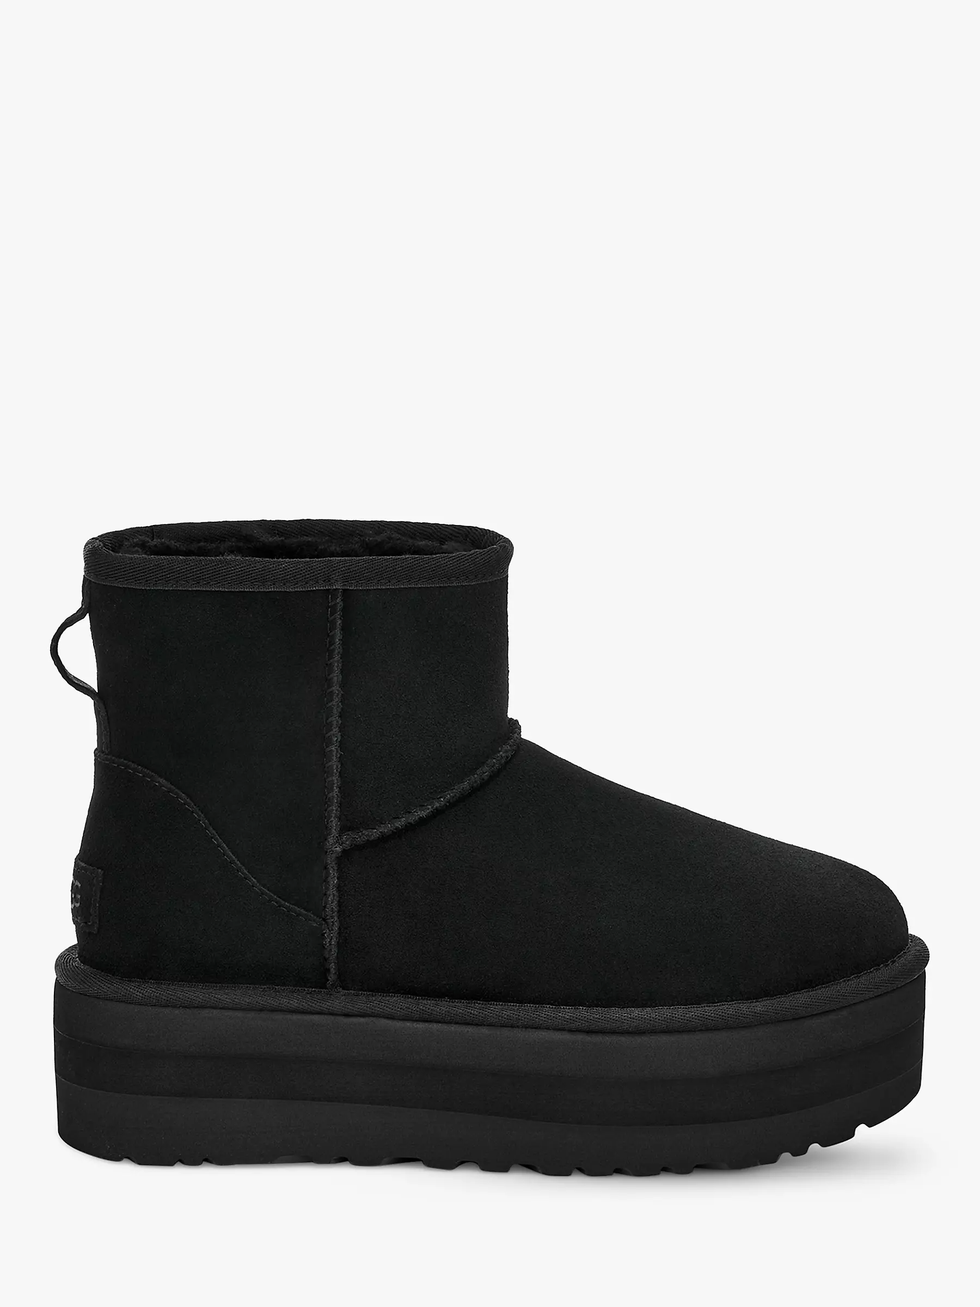 Class Mini Suede Flatform Ankle Boots